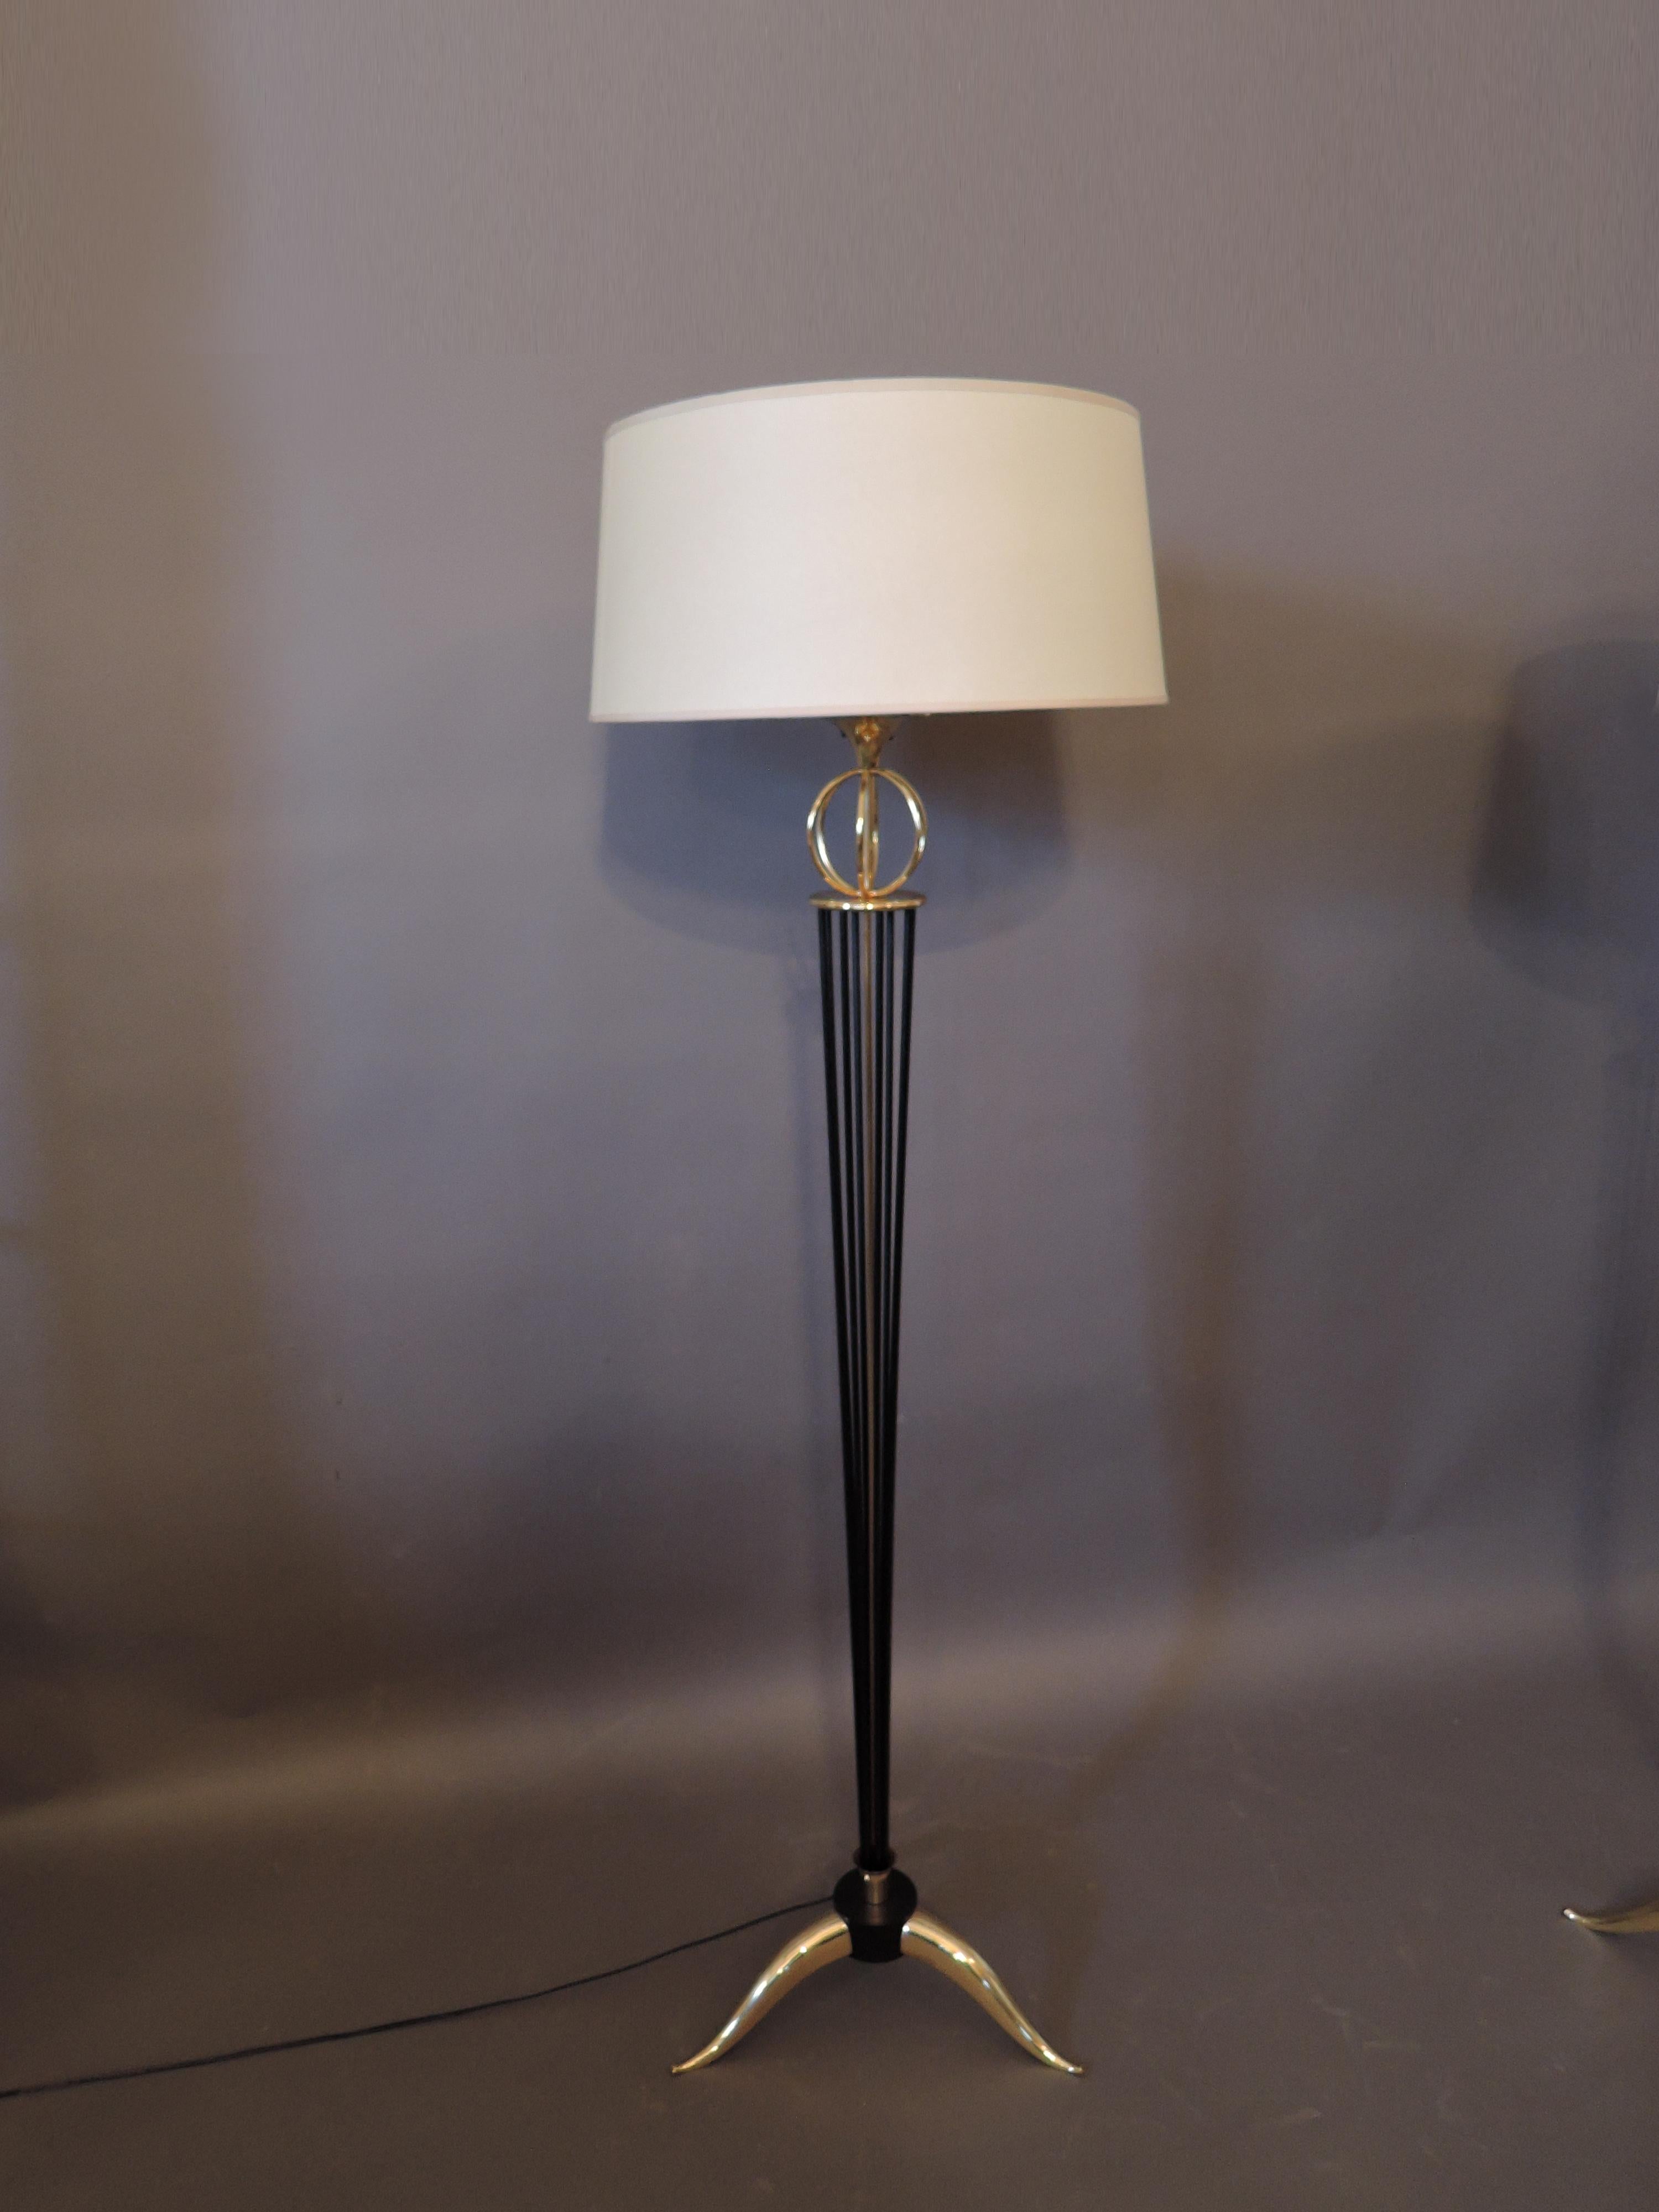 Pair of French Midcentury Floor Lamp by Arlus In Good Condition For Sale In Long Island City, NY